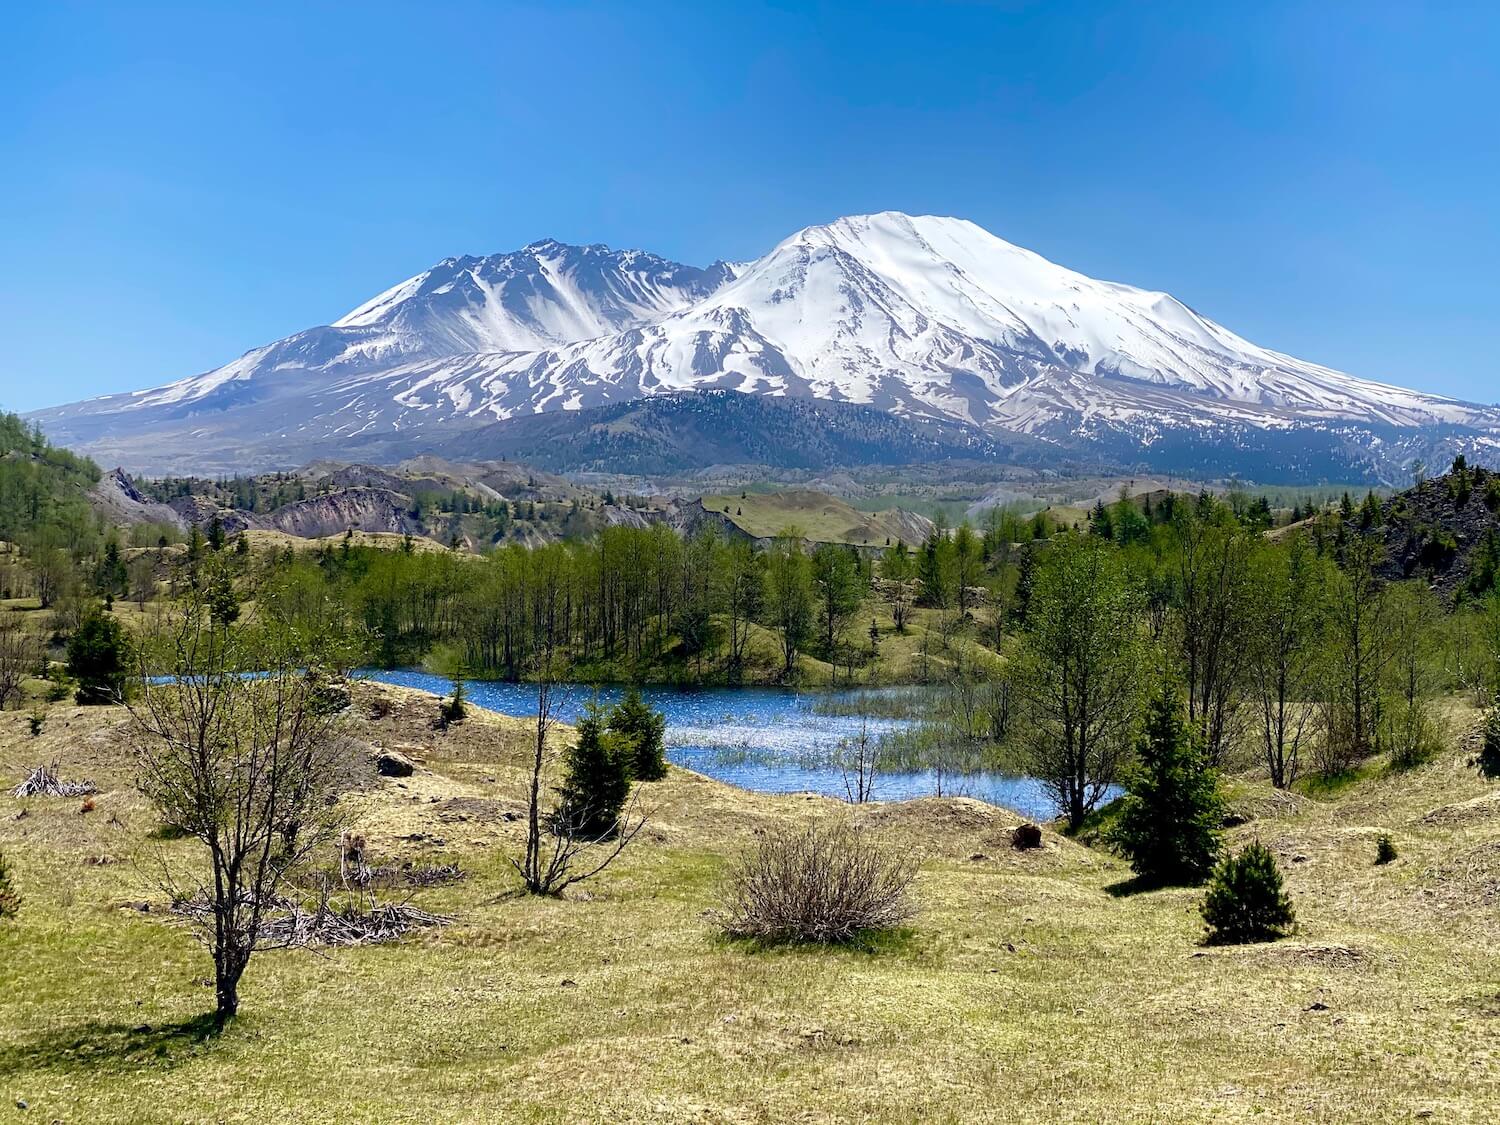 A view of Mt. St. Helens from the Hummocks hiking trail leading to the Loowit Viewpoint. The mountain is covered with white snow which pops against the blue sky in the background. The foreground is a blue lake surrounded by alder trees with fresh springtime green leaves and low mossy ground cover everywhere else.